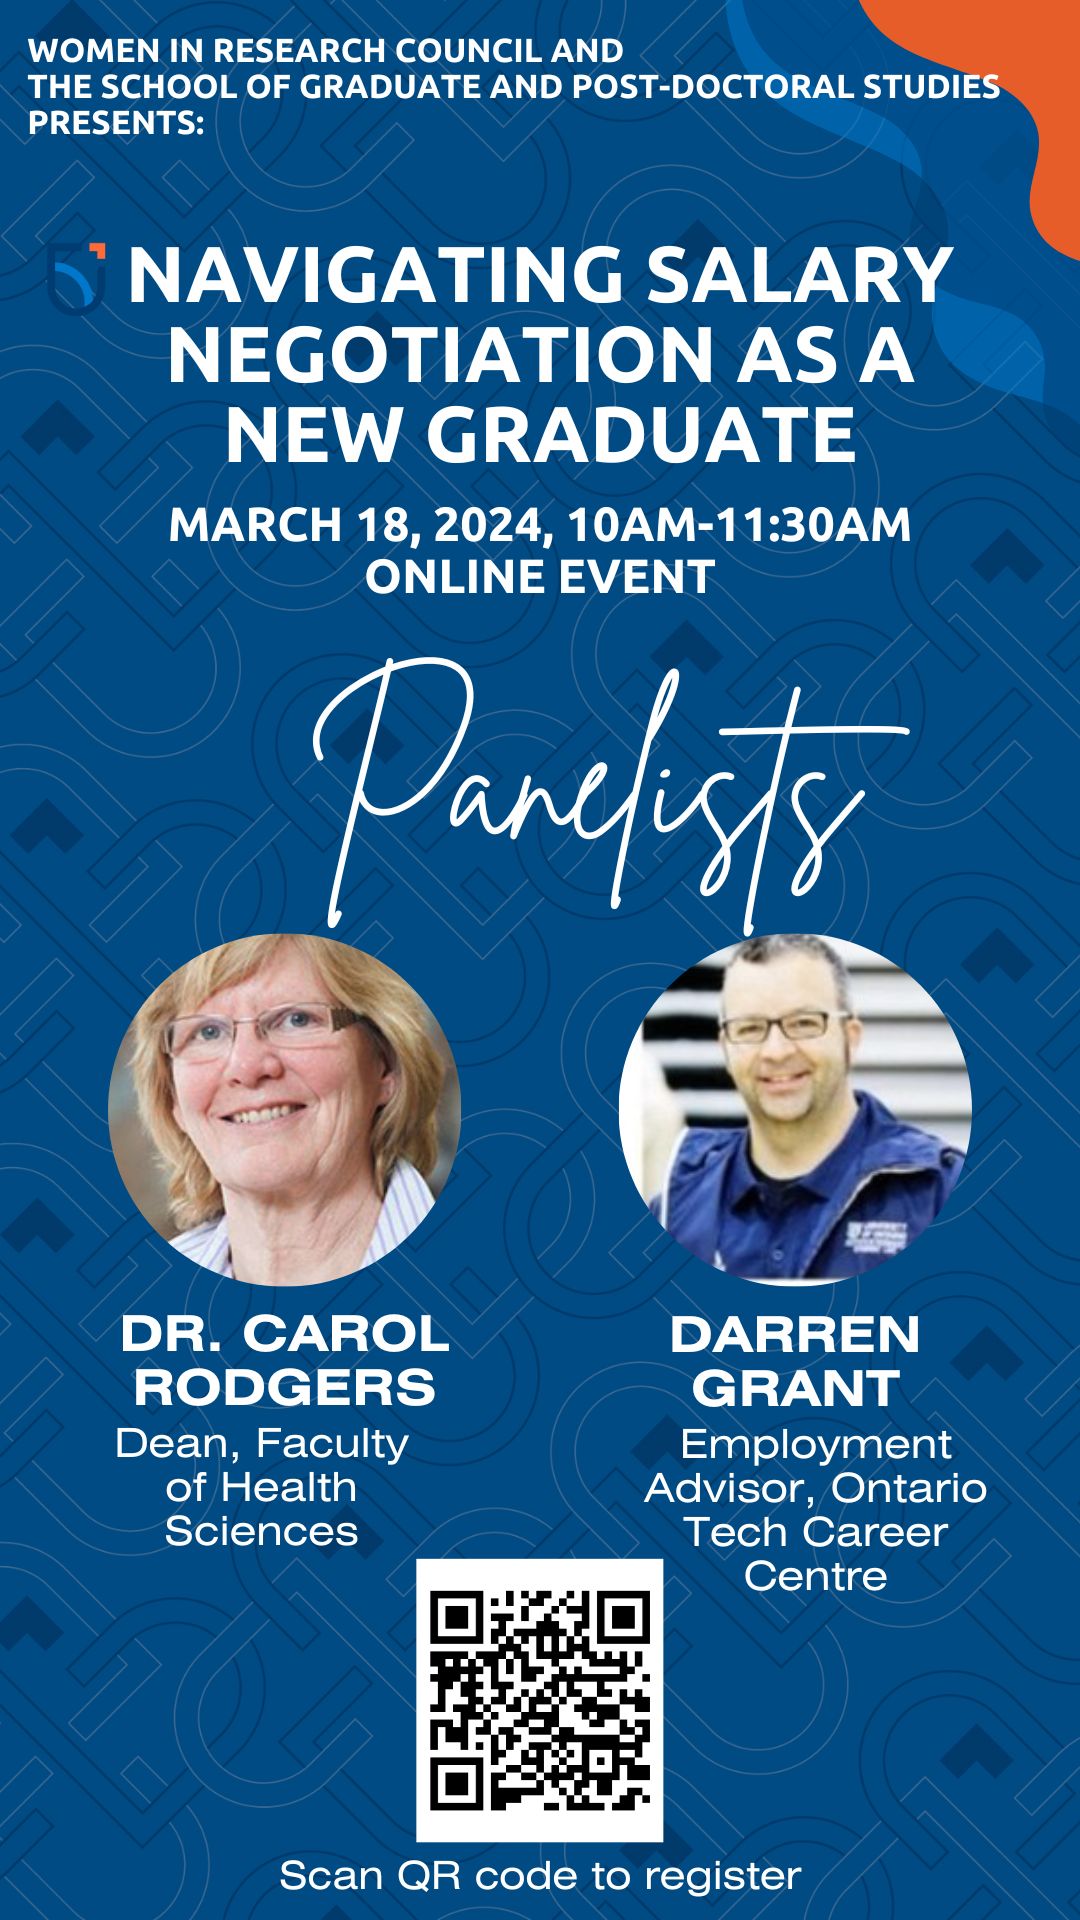 March 18: Navigating Salary Negotiation as a New Graduate